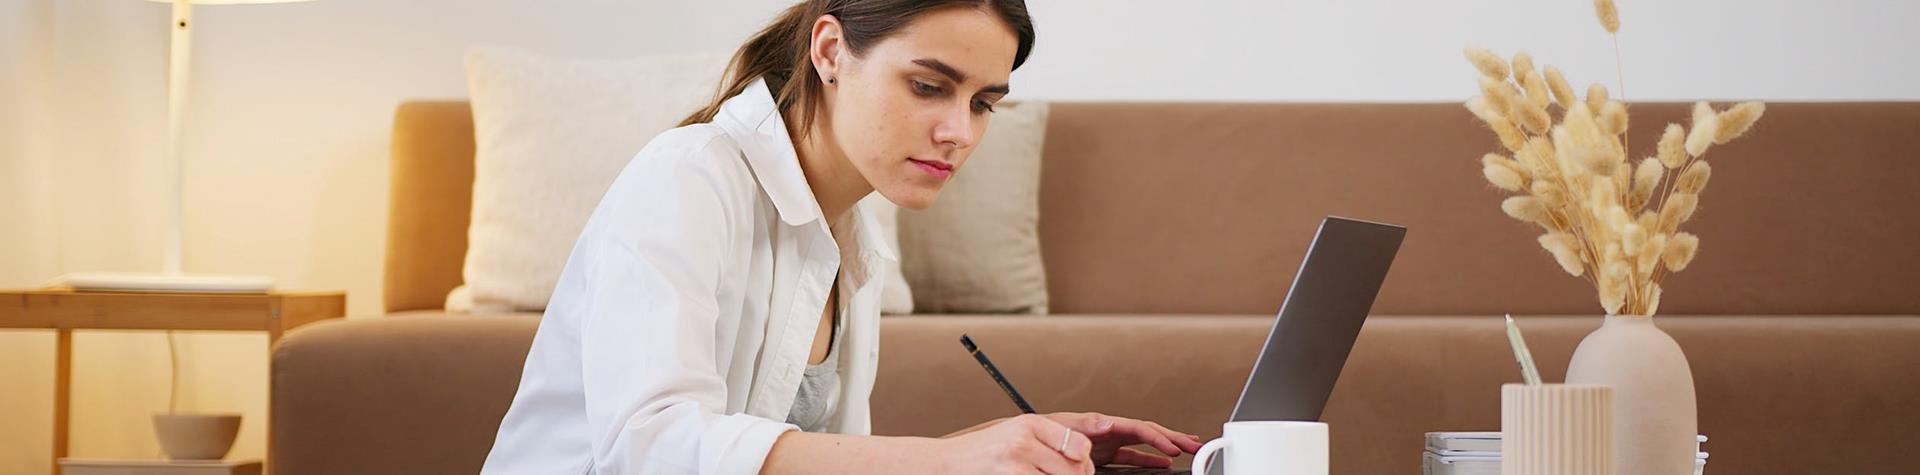 Woman in living room studying from a laptop, taking notes in an A4 notepad